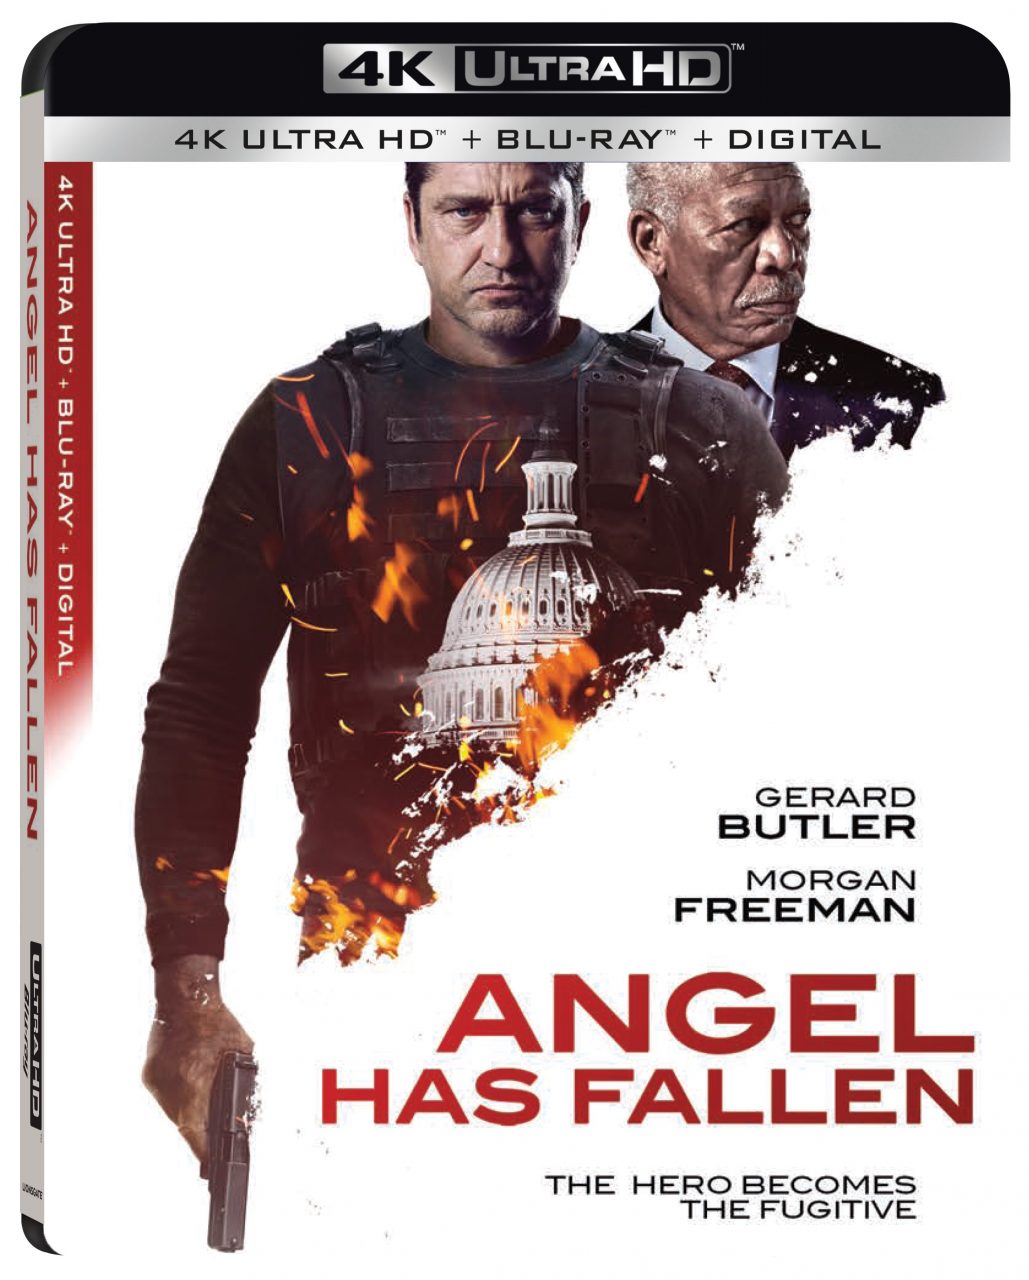 Angel Has Fallen 4K Ultra HD Combo Pack cover (Lionsgate Home Entertainment)